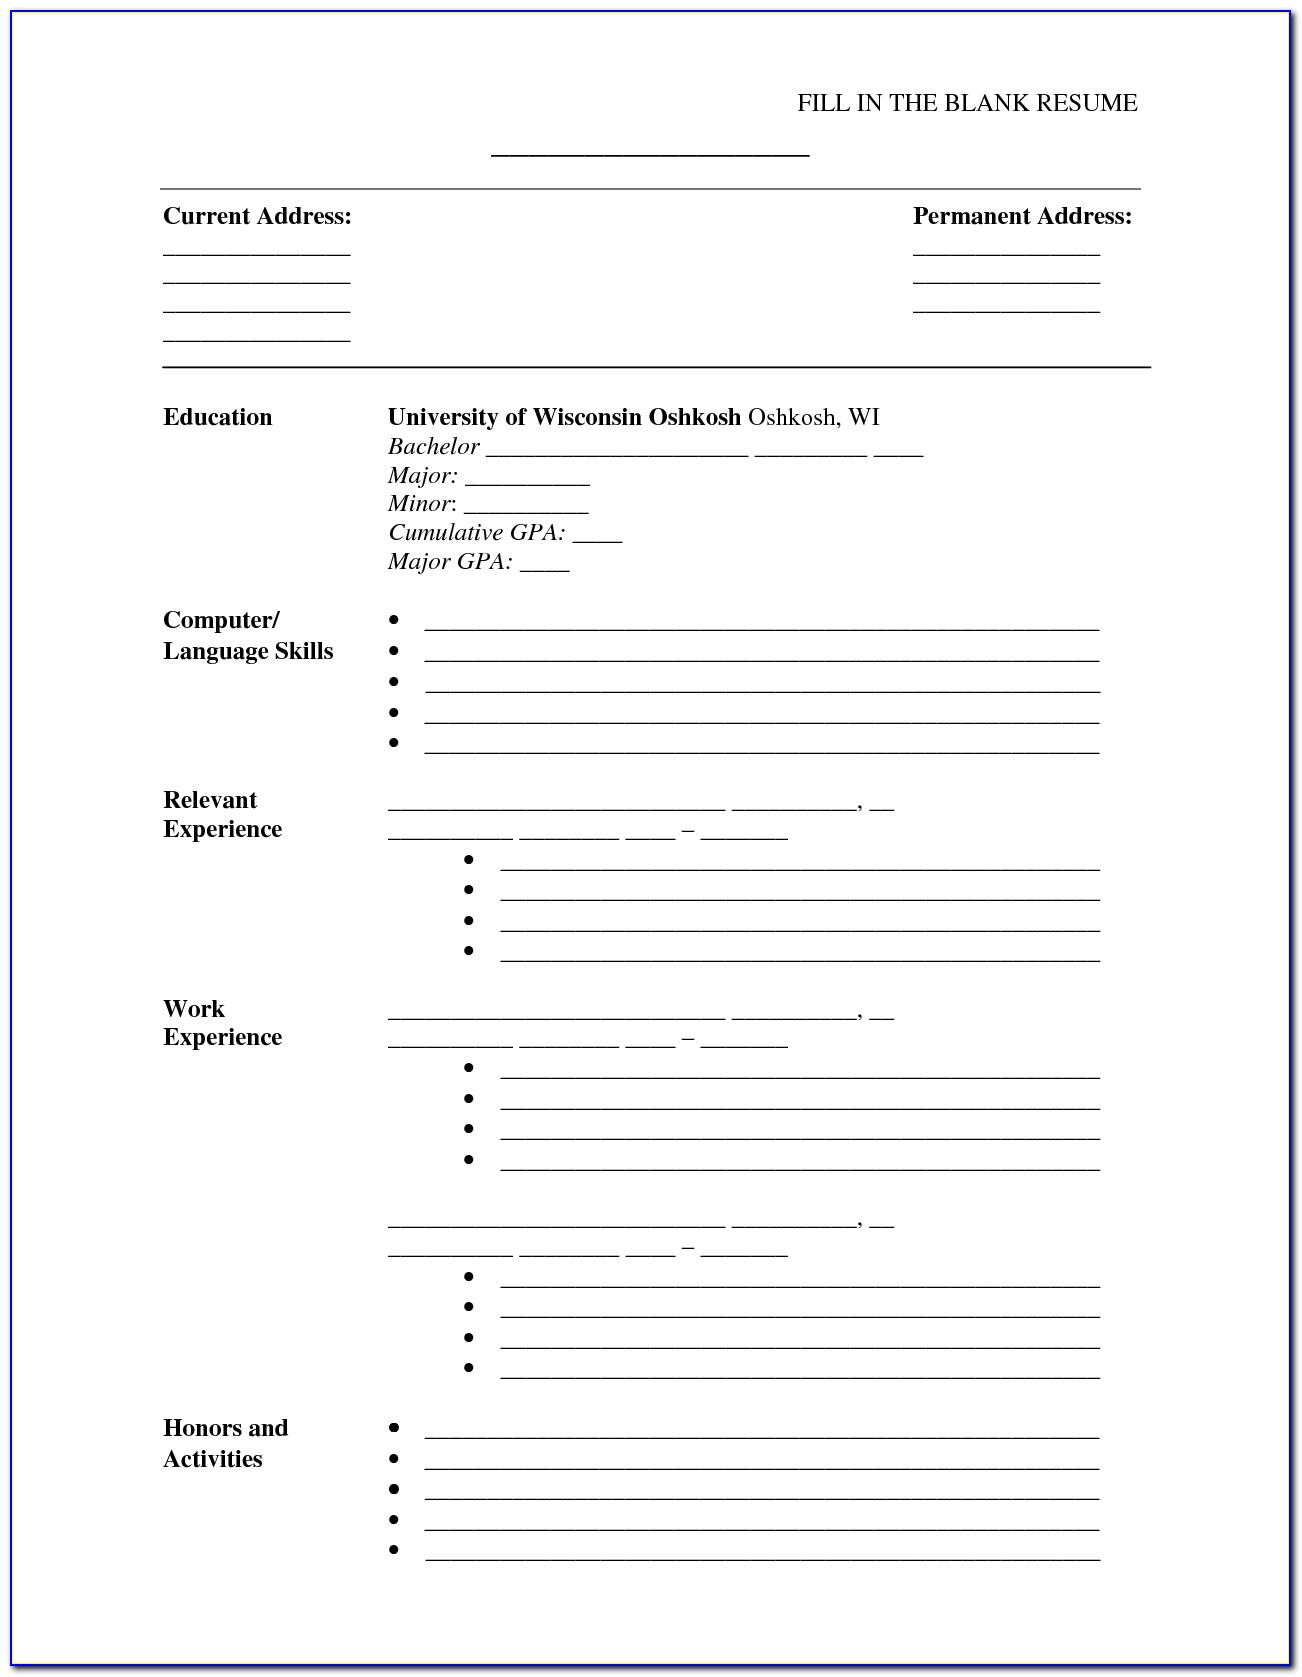 Fill In The Blank Resume Printable